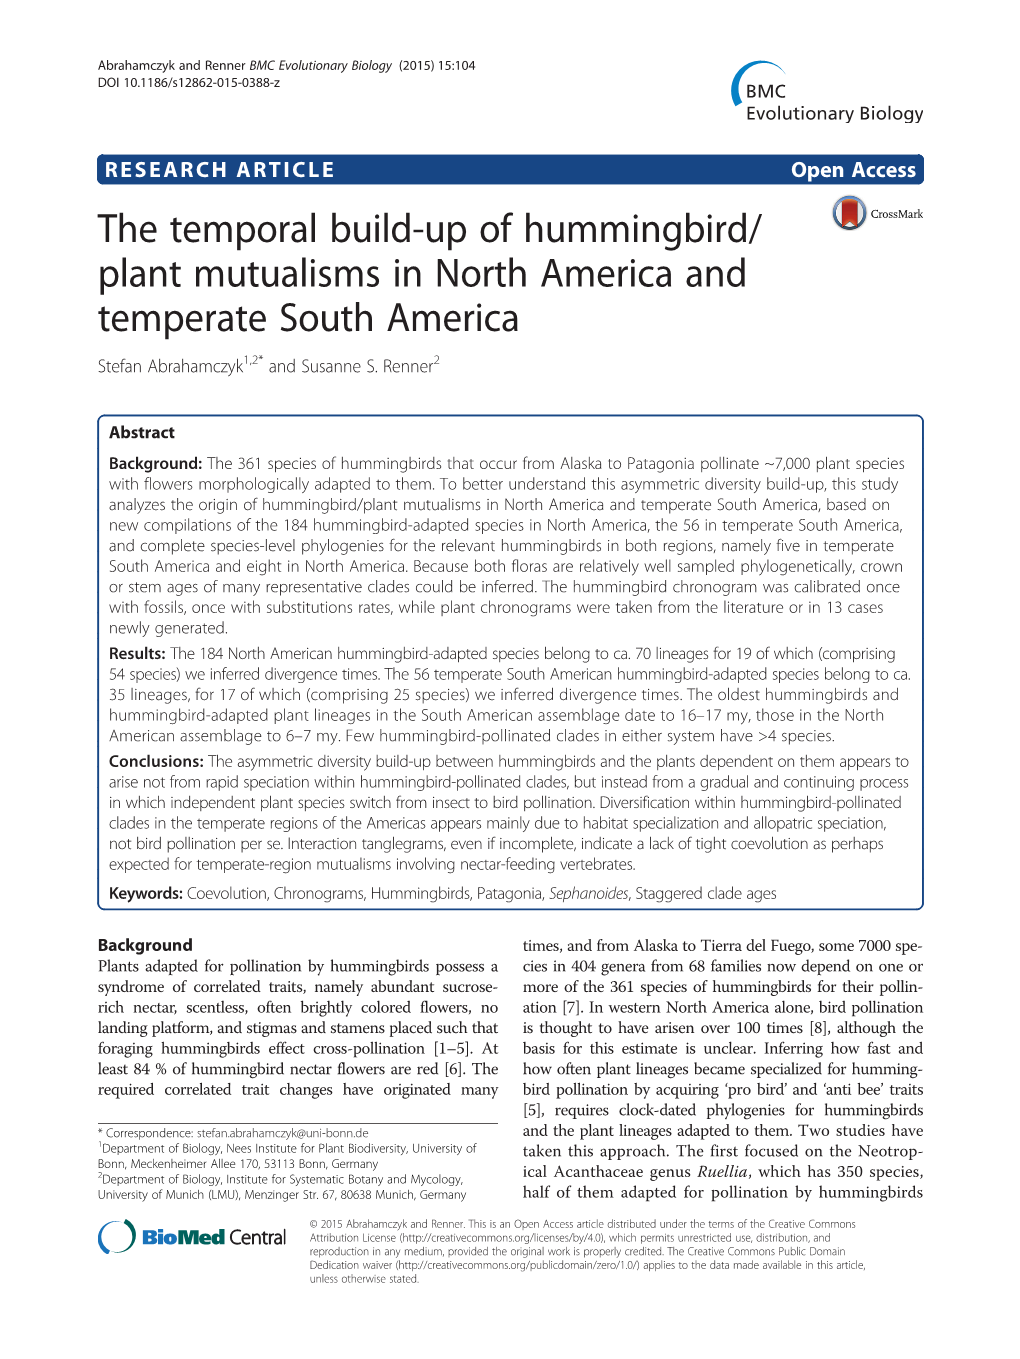 The Temporal Build-Up of Hummingbird/Plant Mutualisms in North America